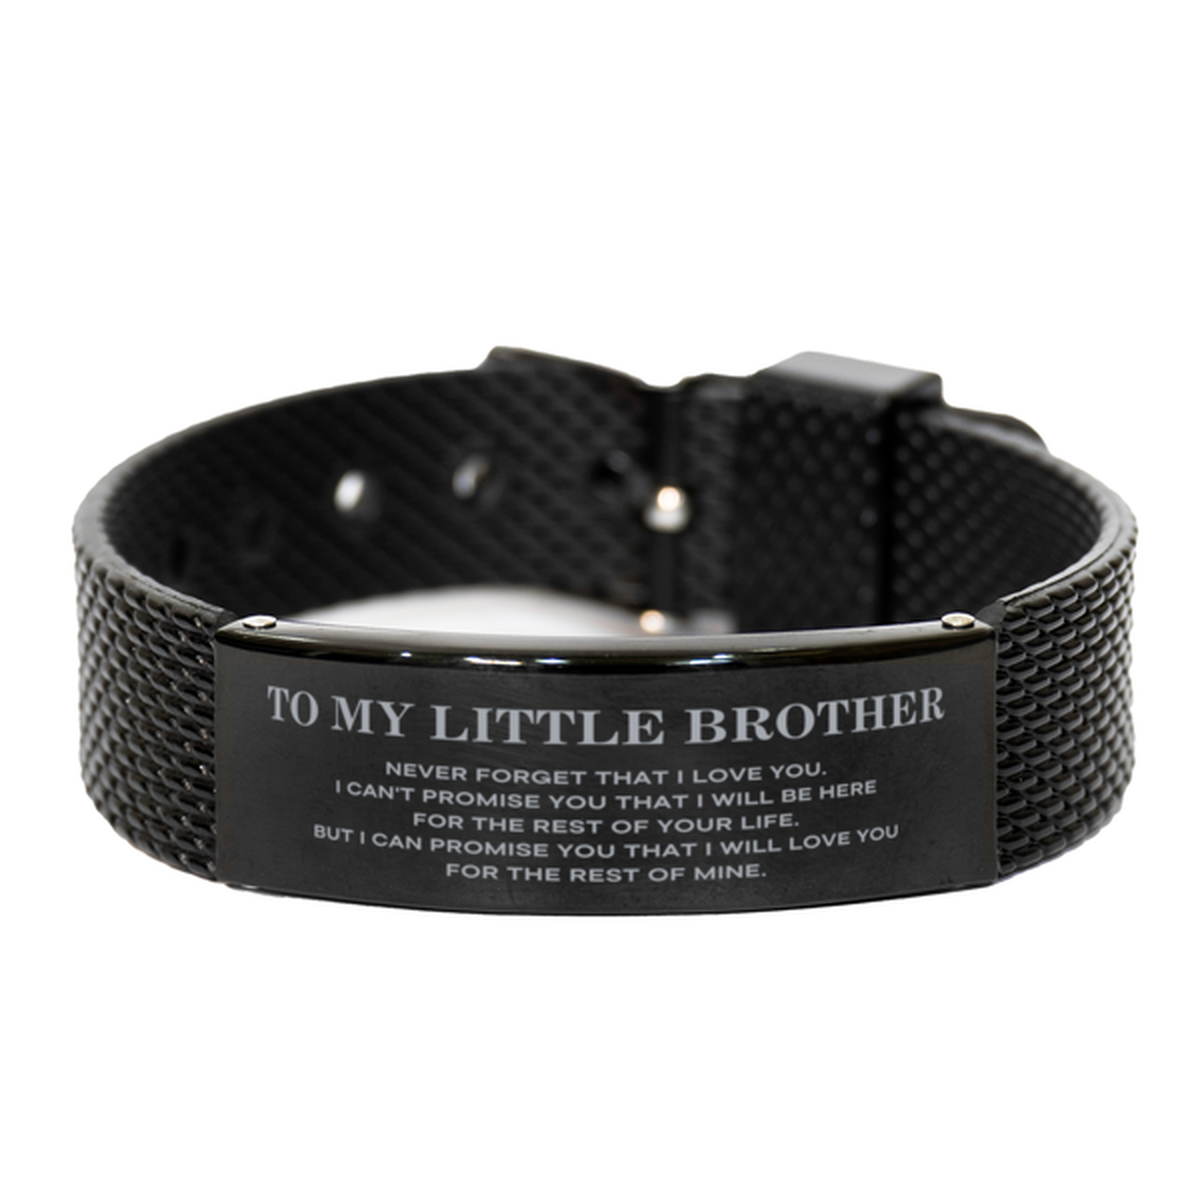 To My Little Brother Gifts, I will love you for the rest of mine, Love Little Brother Bracelet, Birthday Christmas Unique Black Shark Mesh Bracelet For Little Brother